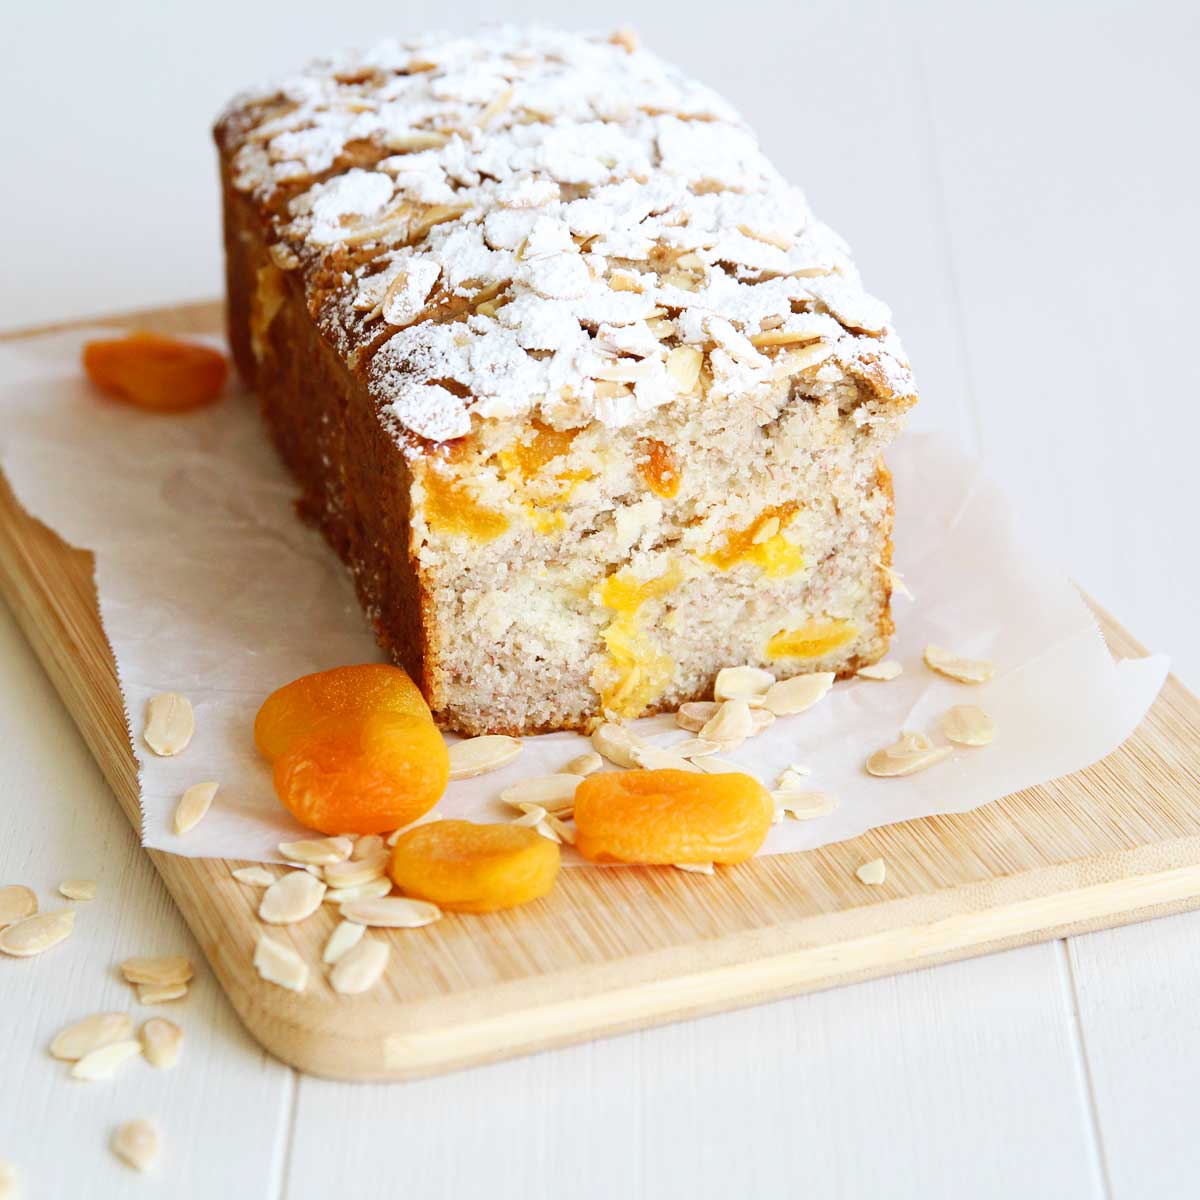 The Best Treat! Apricot Almond Banana Bread with added Almond Flour